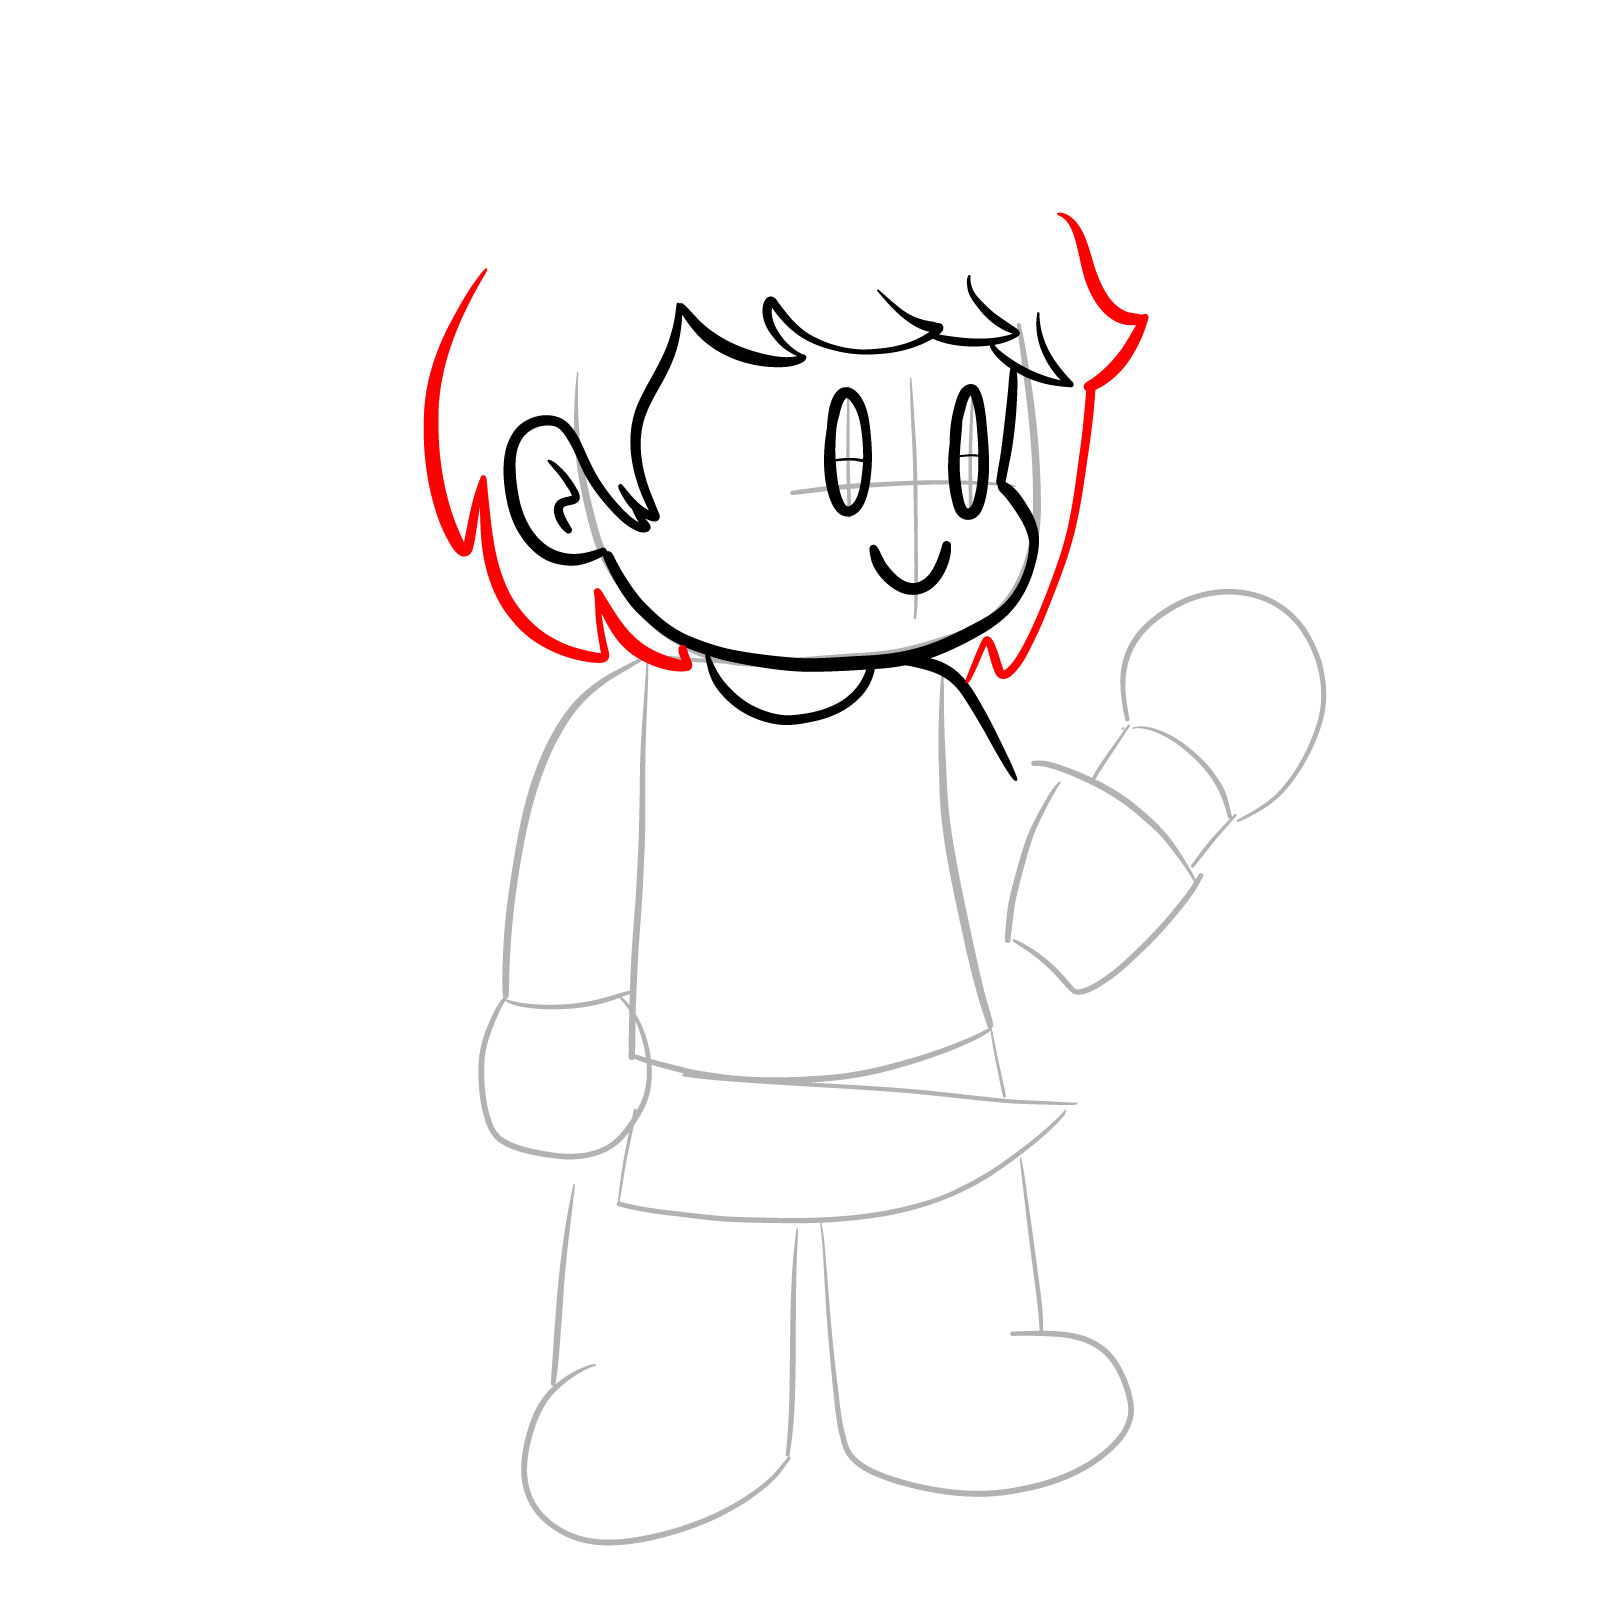 How to draw Chara from FNF - step 12